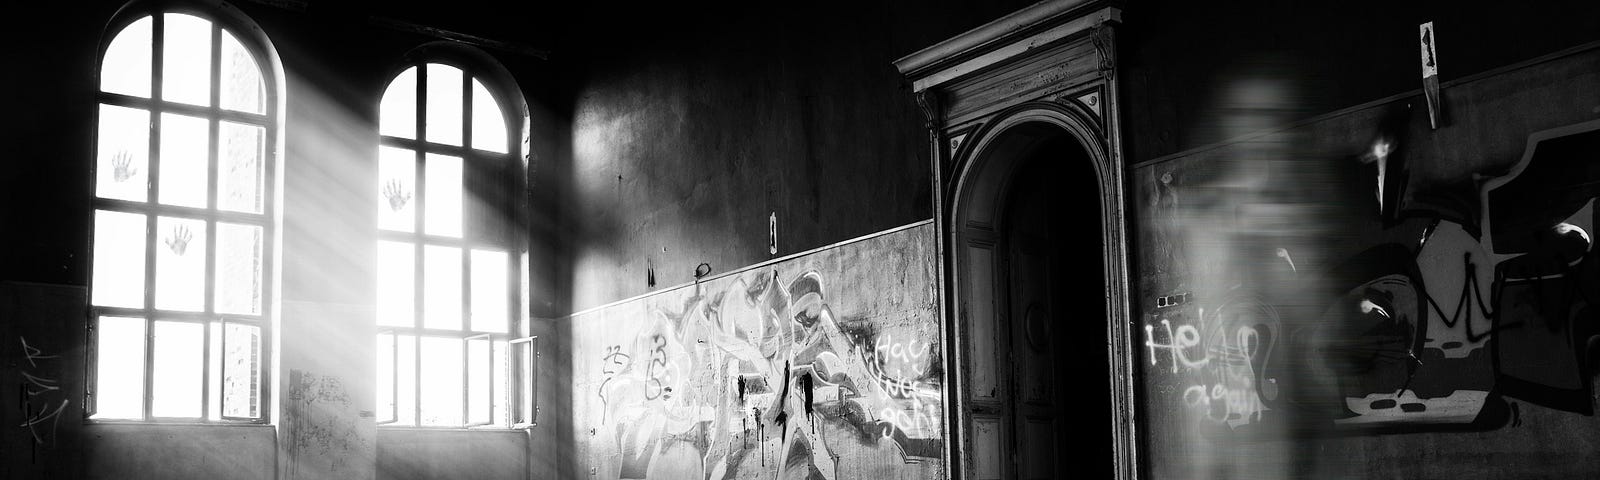 A black-and-white picture of a ghastly figure inside an abandoned building.